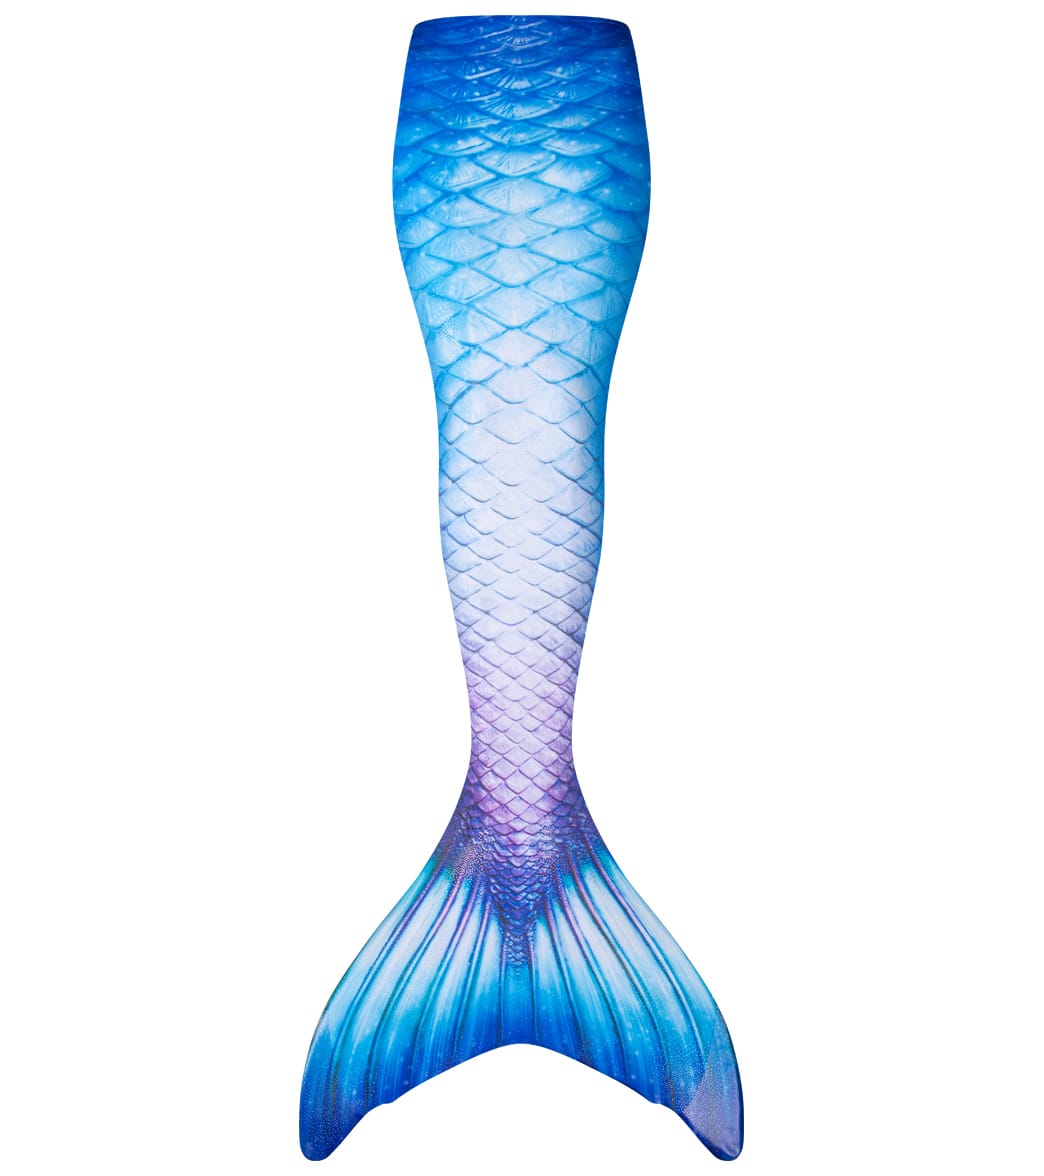 Fin Fun Blue Lagoon Mermaid Tail & Monofin Youth/Adult - Youth Large 10 - Swimoutlet.com